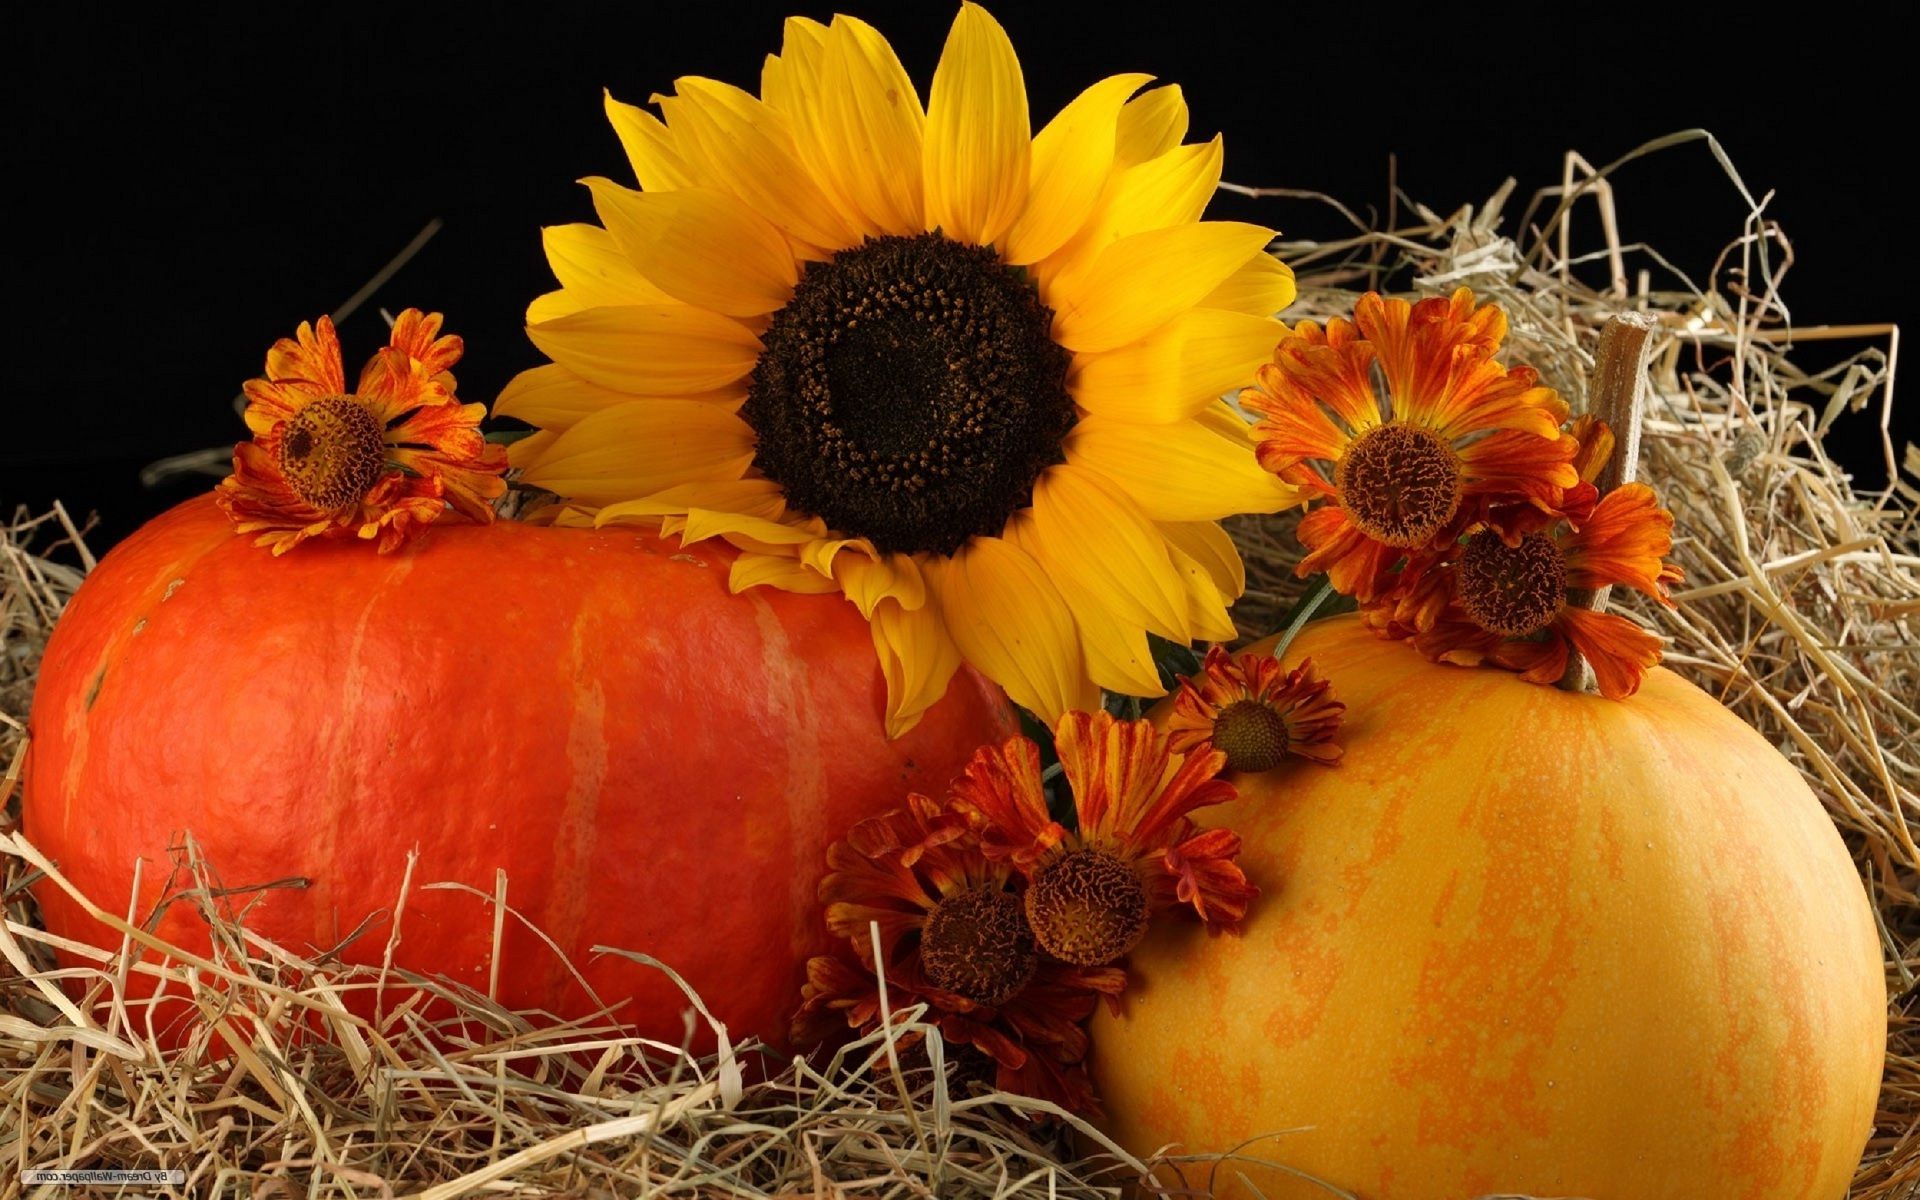 Sunflowers and delicious pumpkins